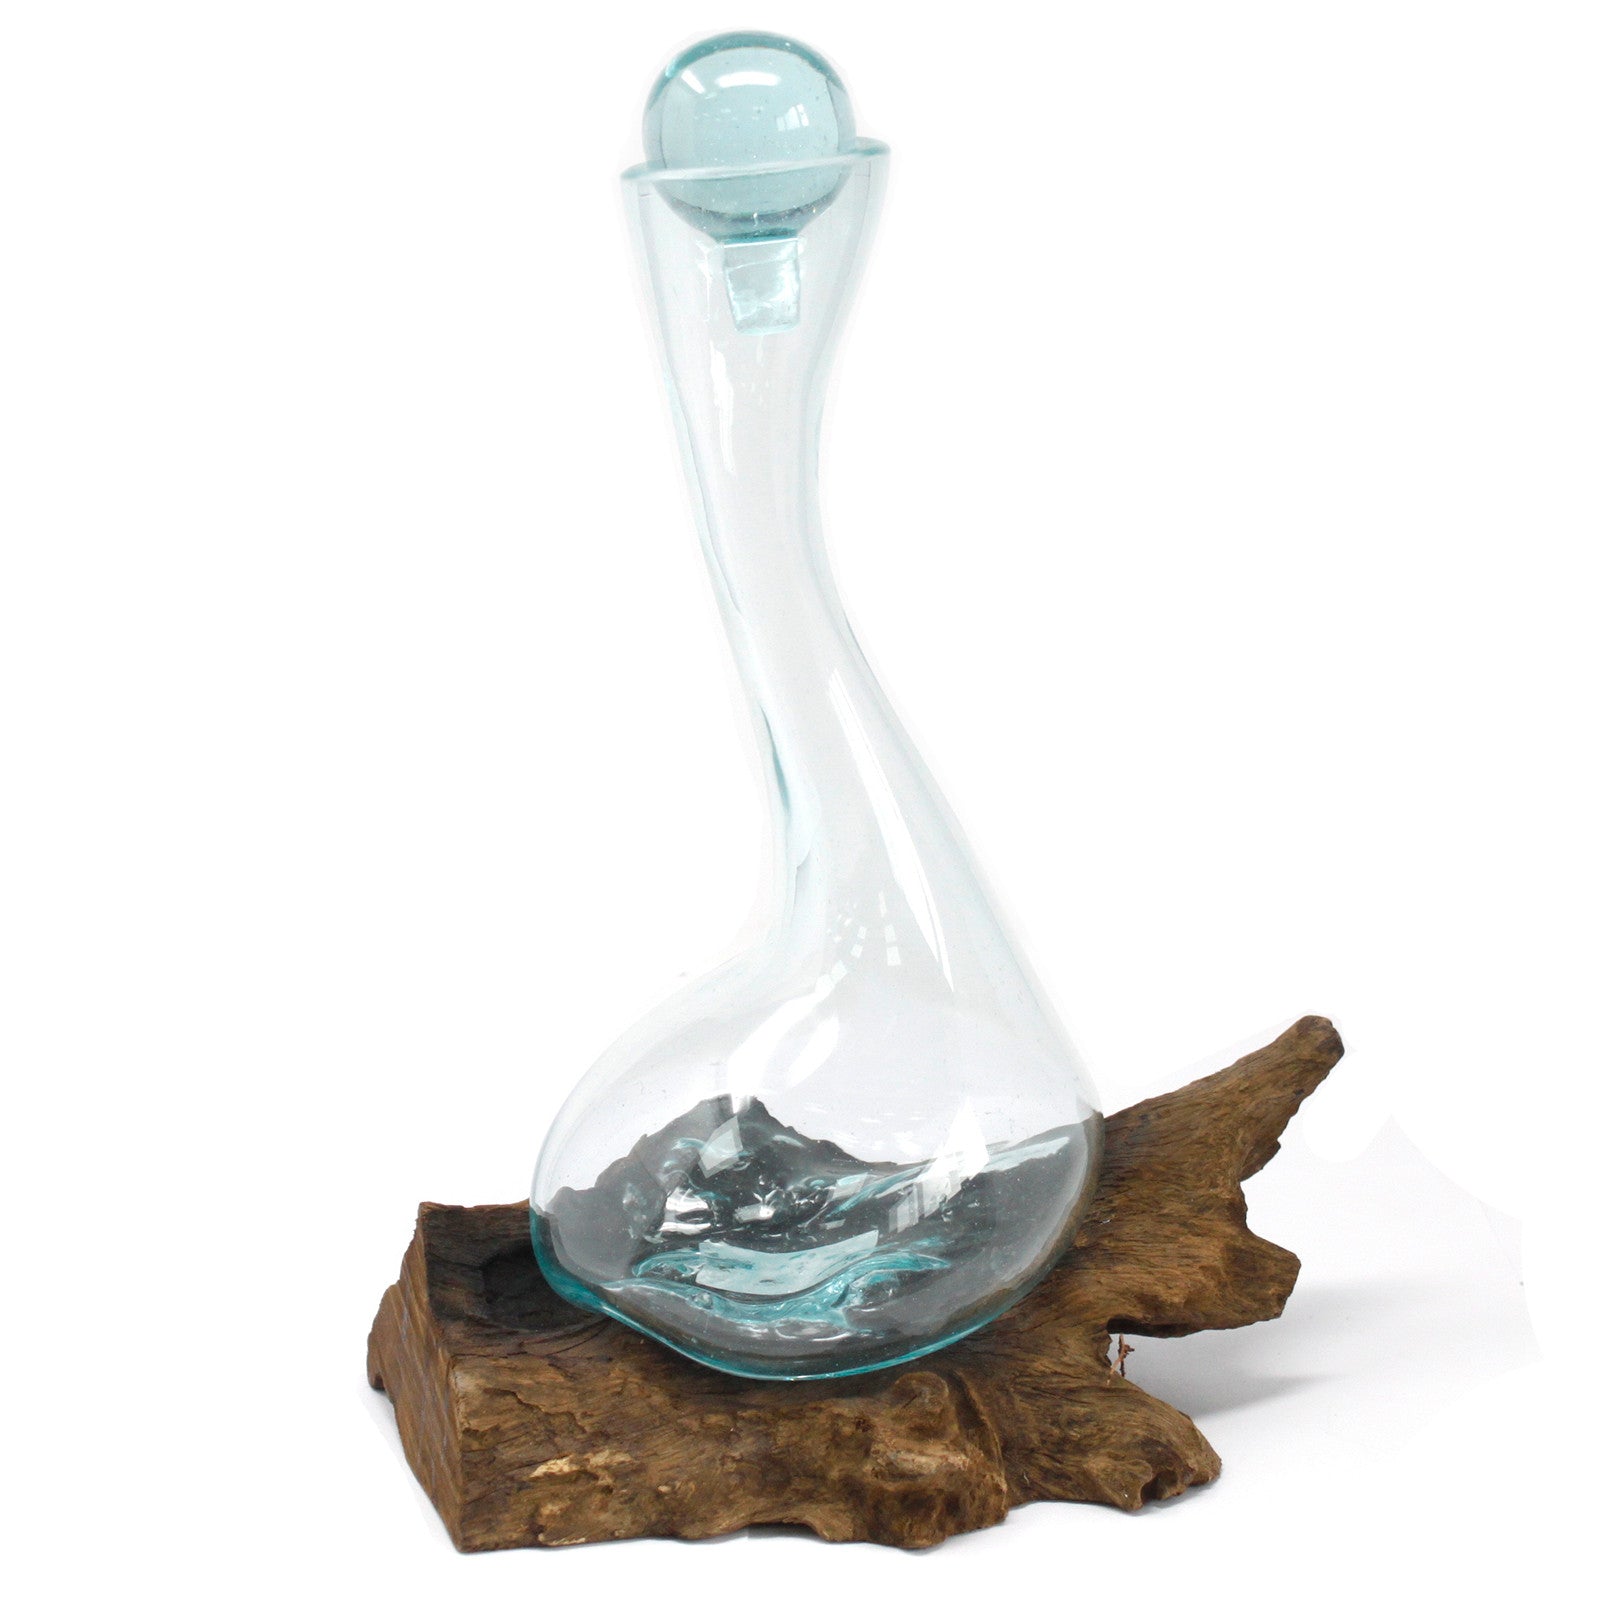 View Molten Glass on Wood Wine Decanter information